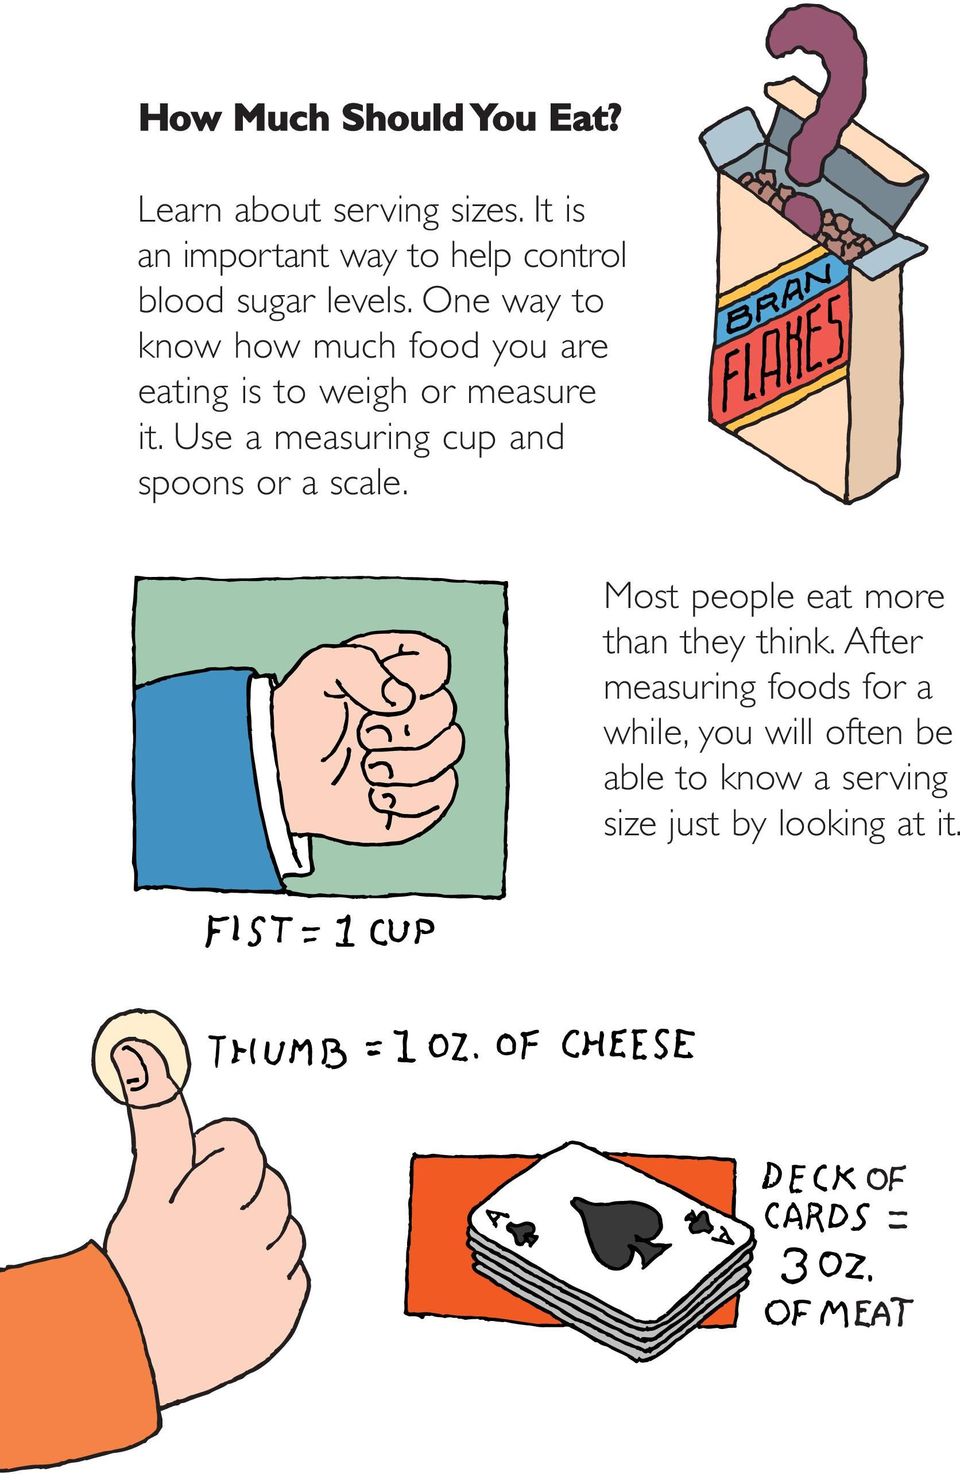 One way to know how much food you are eating is to weigh or measure it.